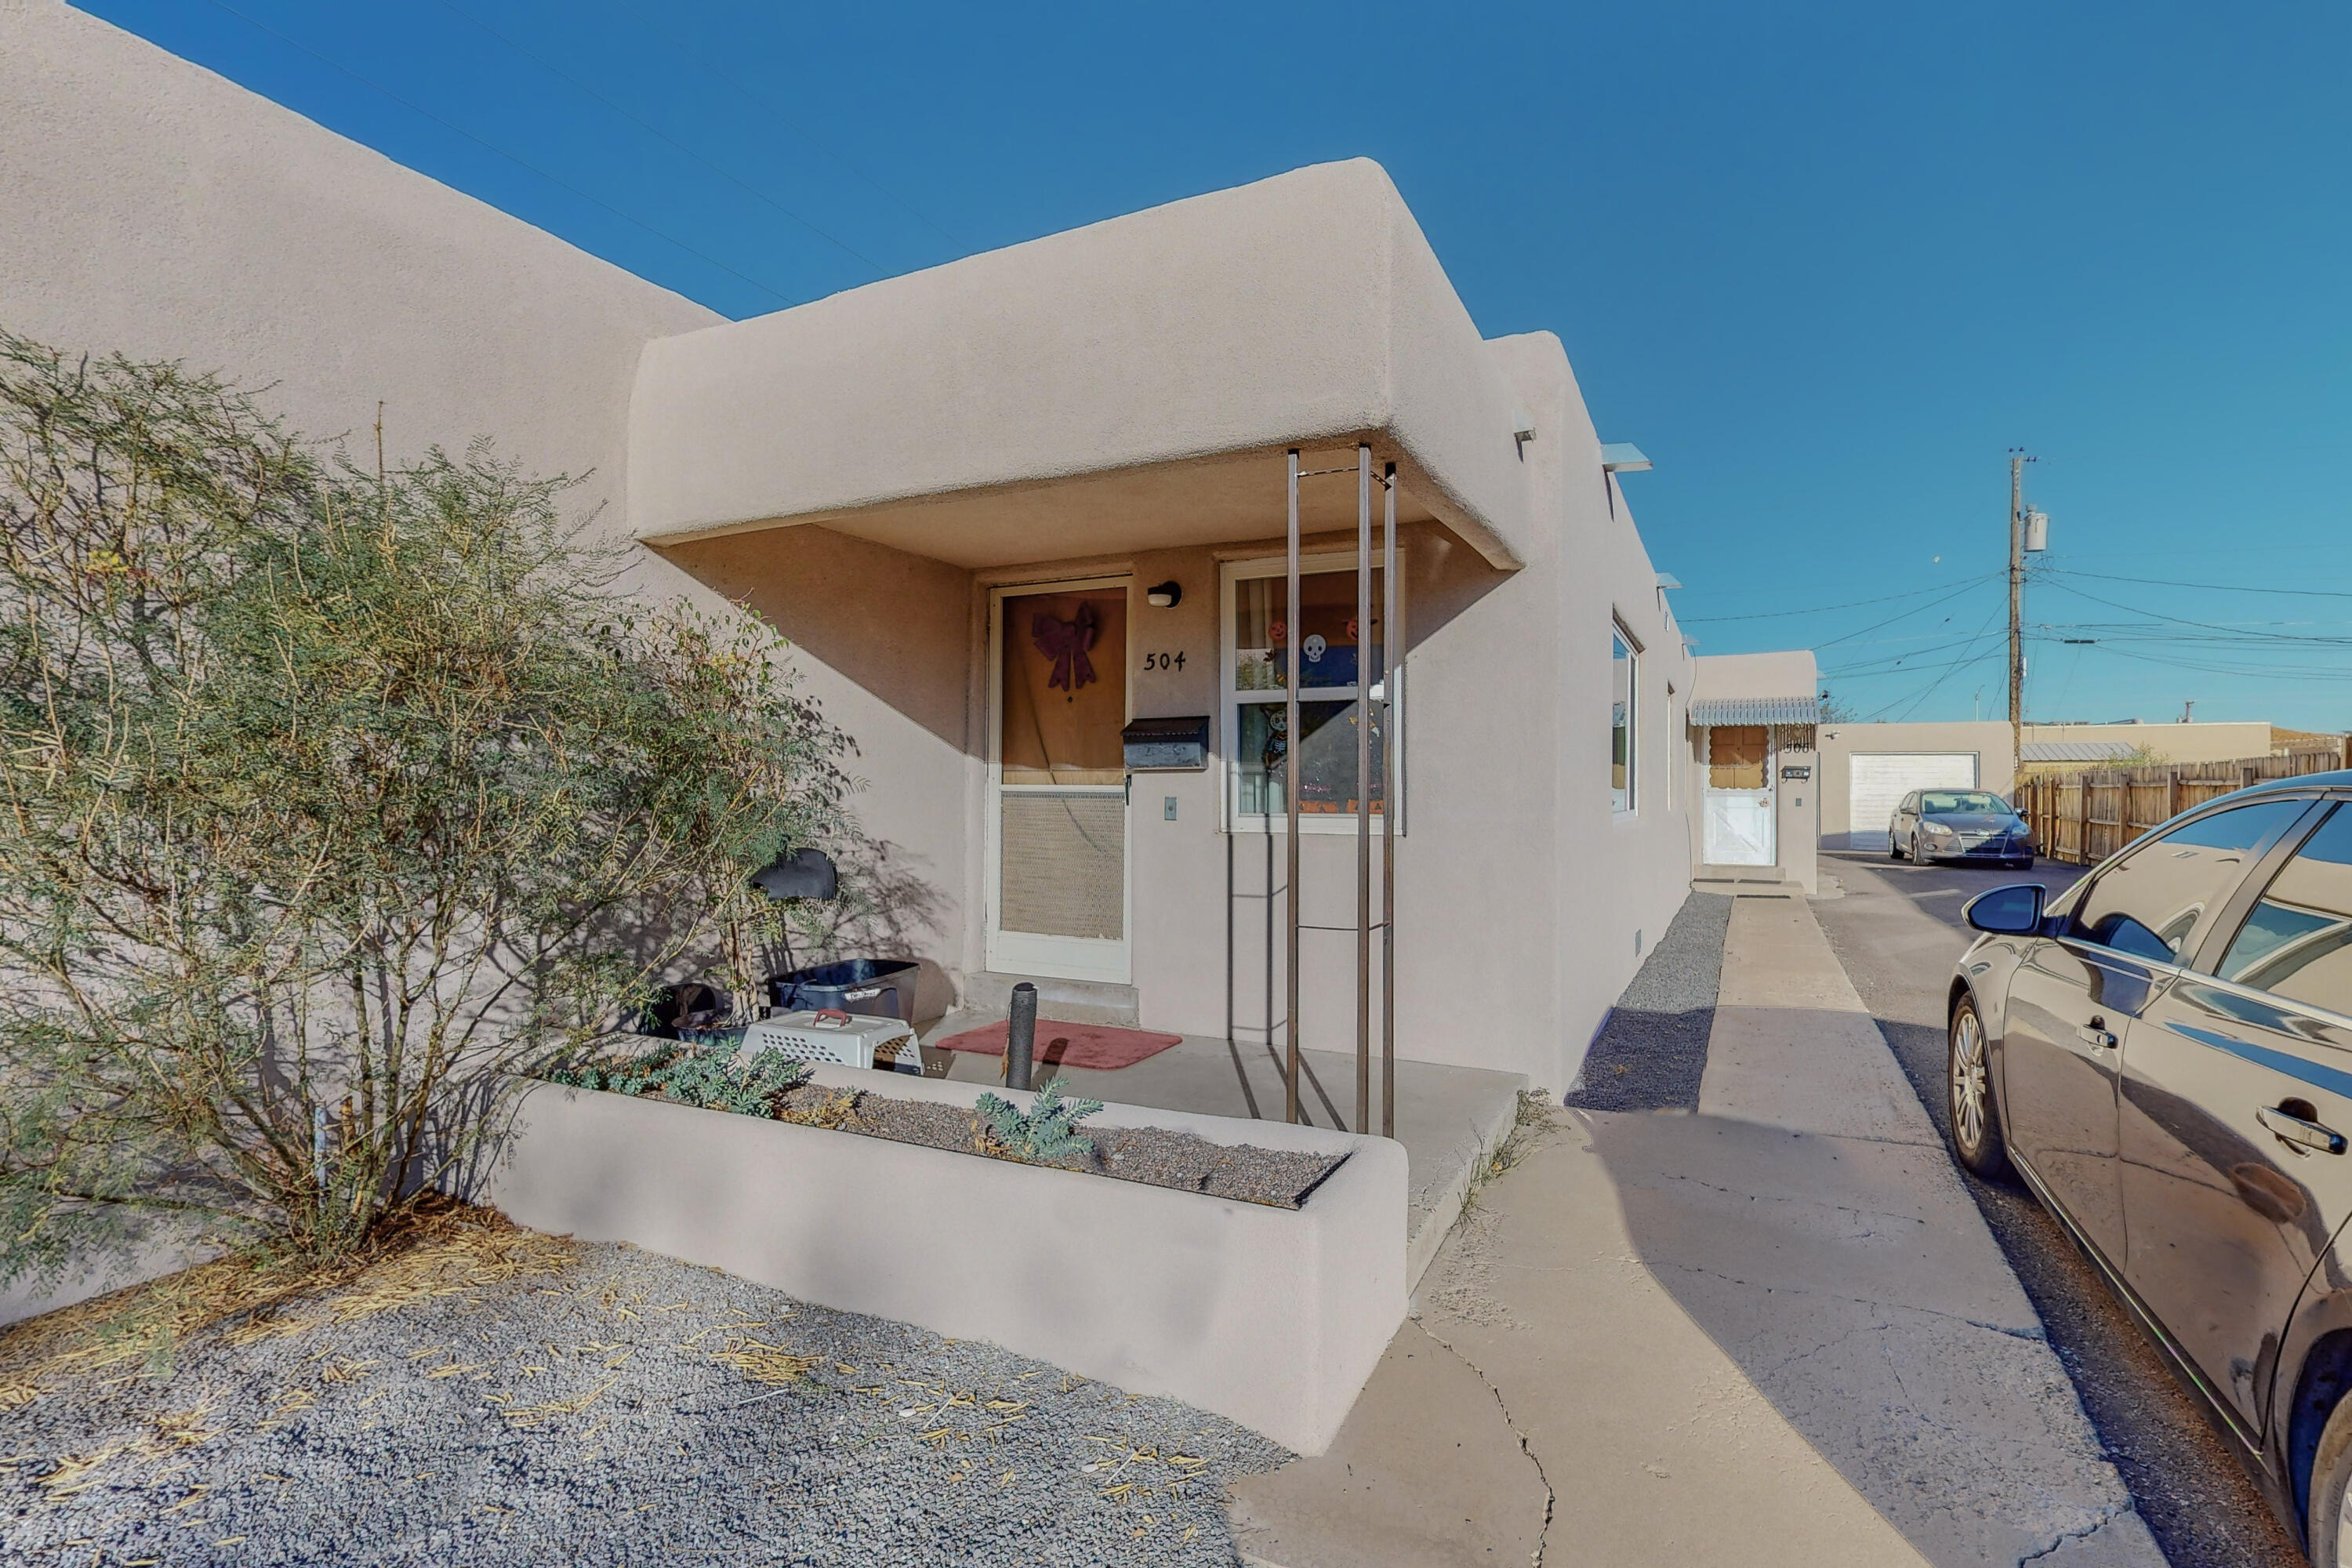 504 Cagua Drive SE, Albuquerque, New Mexico 87108, 2 Bedrooms Bedrooms, ,1 BathroomBathrooms,Residential Income,For Sale,504 Cagua Drive SE,1061817